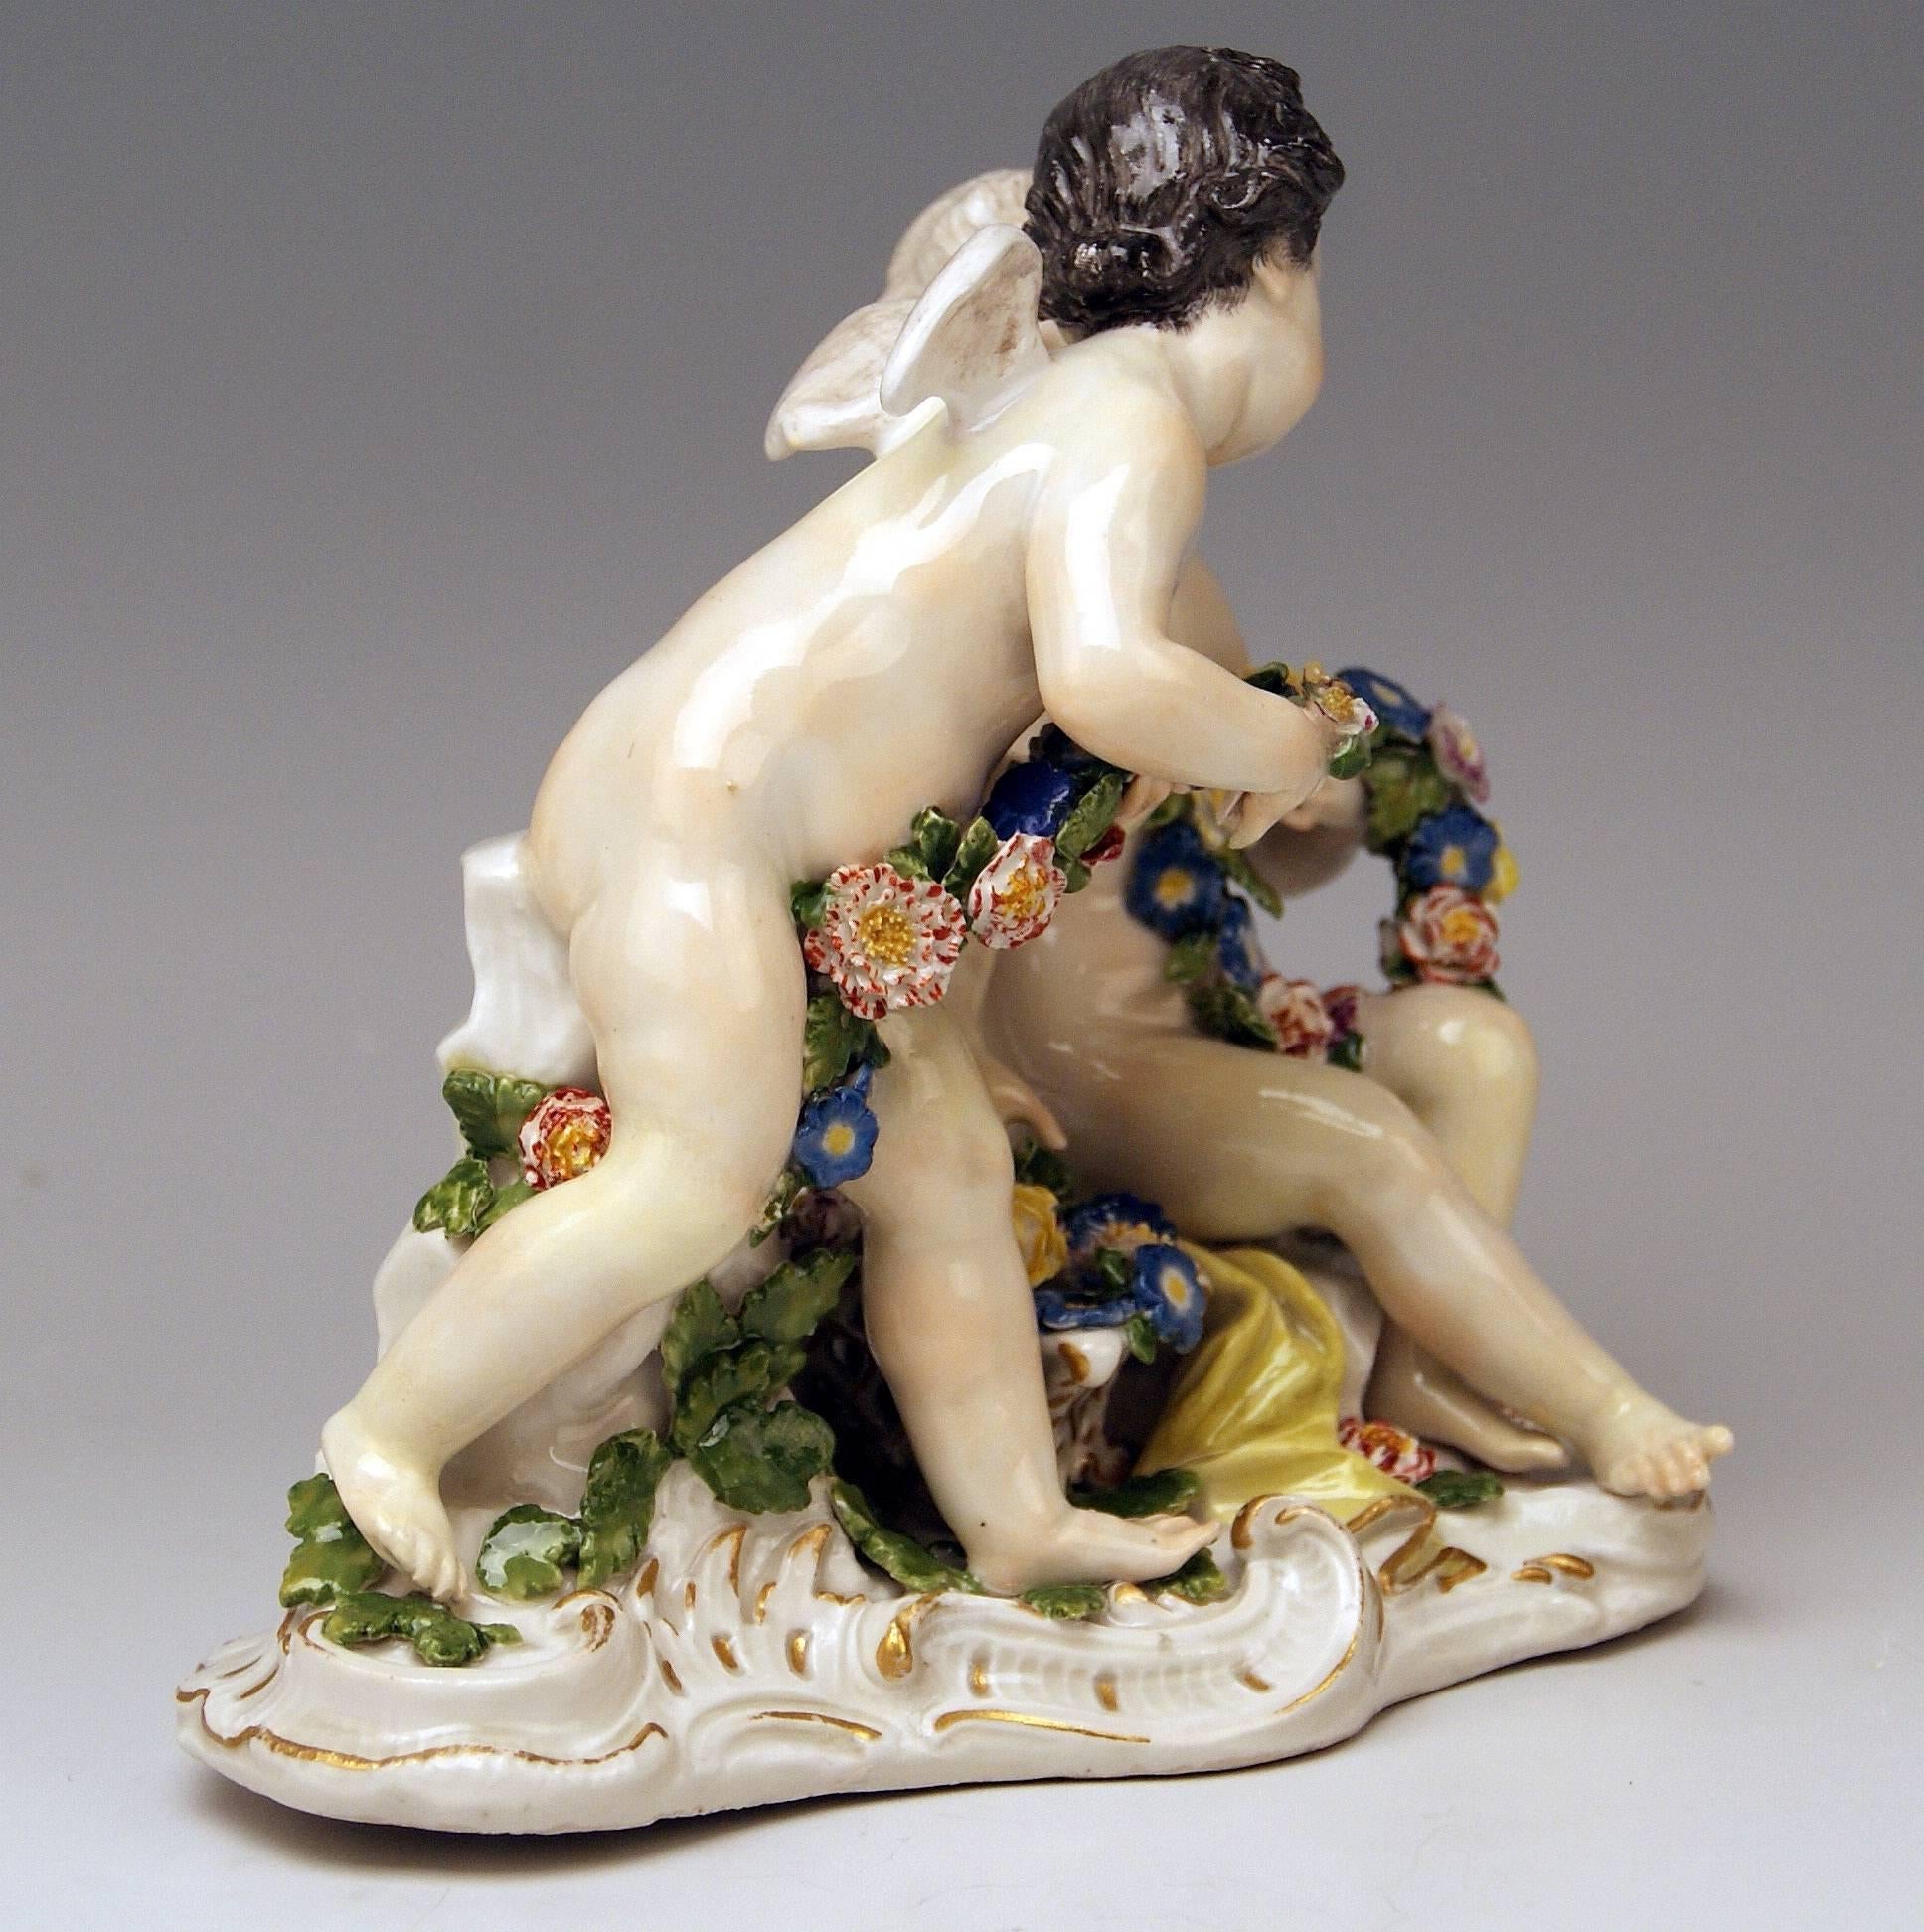 Meissen lovely figurines of stunning appearance: cherubs with flowers
model 2372

SIZE:
height:    6.49  inches  (= 16.5 cm)
width:     6.37  inches   (= 16.2 cm)
depth:    3.54  inches    (= 9.0 cm)

Manufactory: Meissen
Hallmarked: Blue Meissen